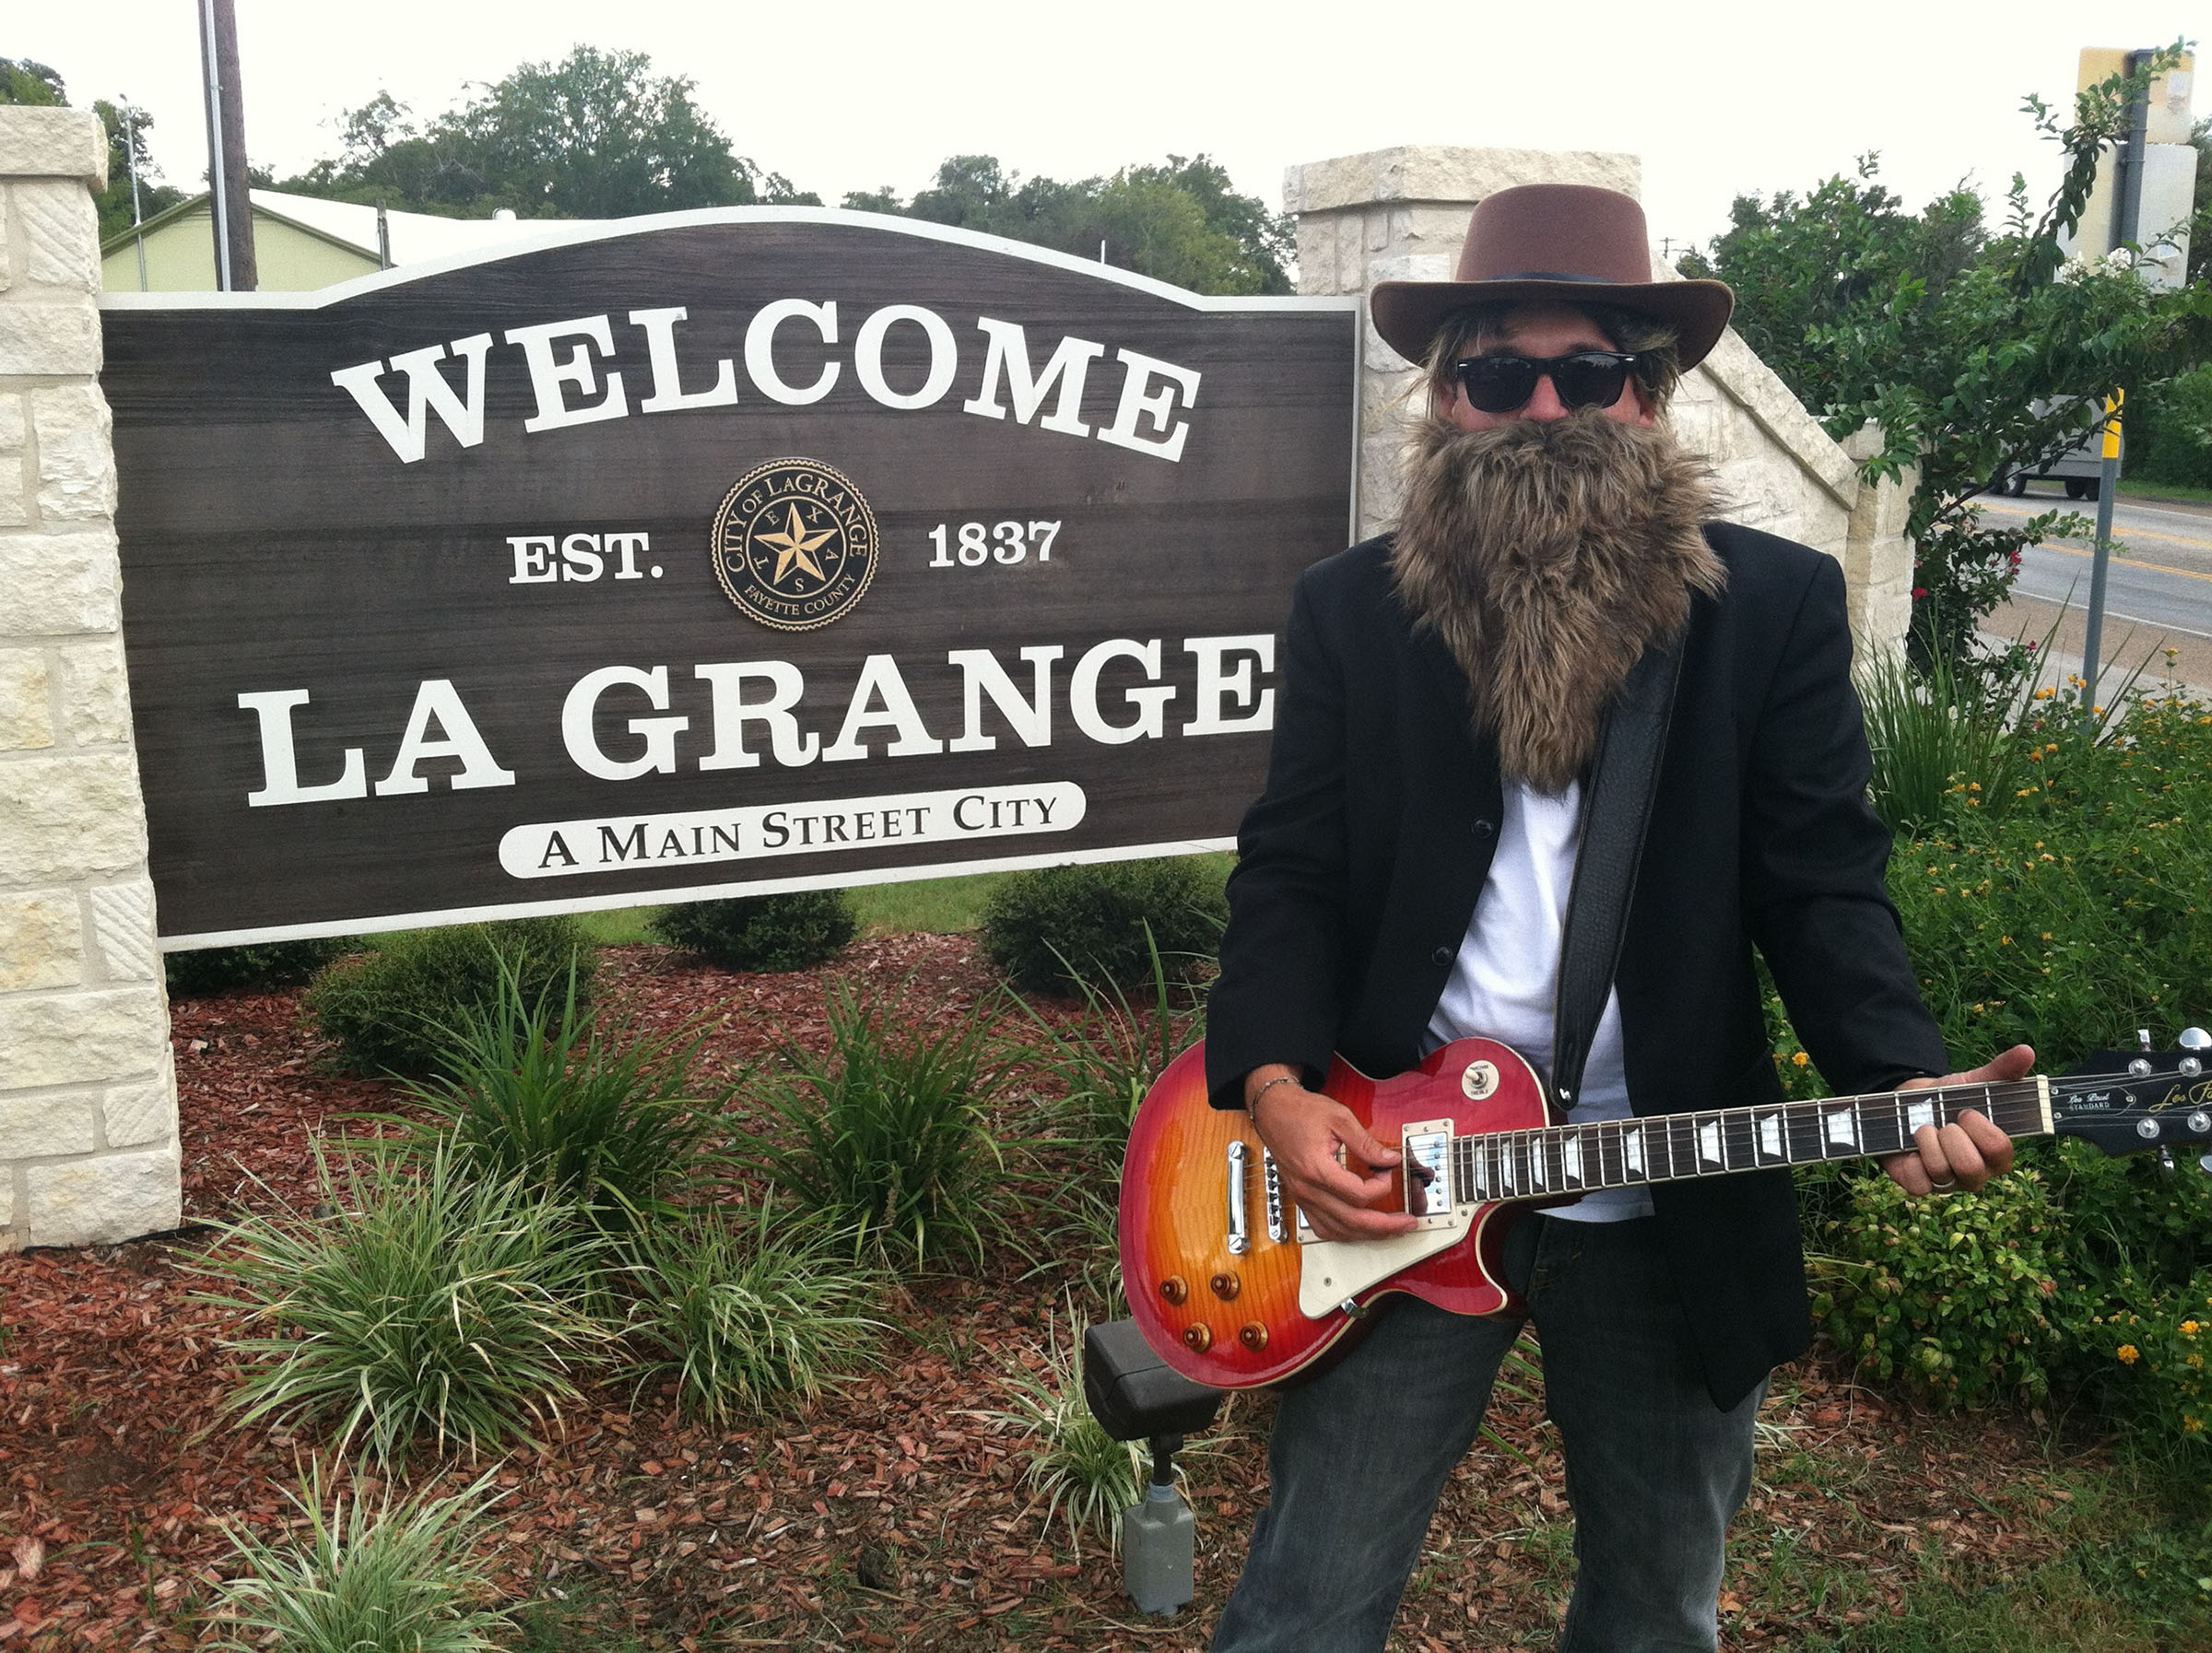 A man wearing a hat and false wig stands with a guitar in front of a sign reading "Welcome to La Grange"